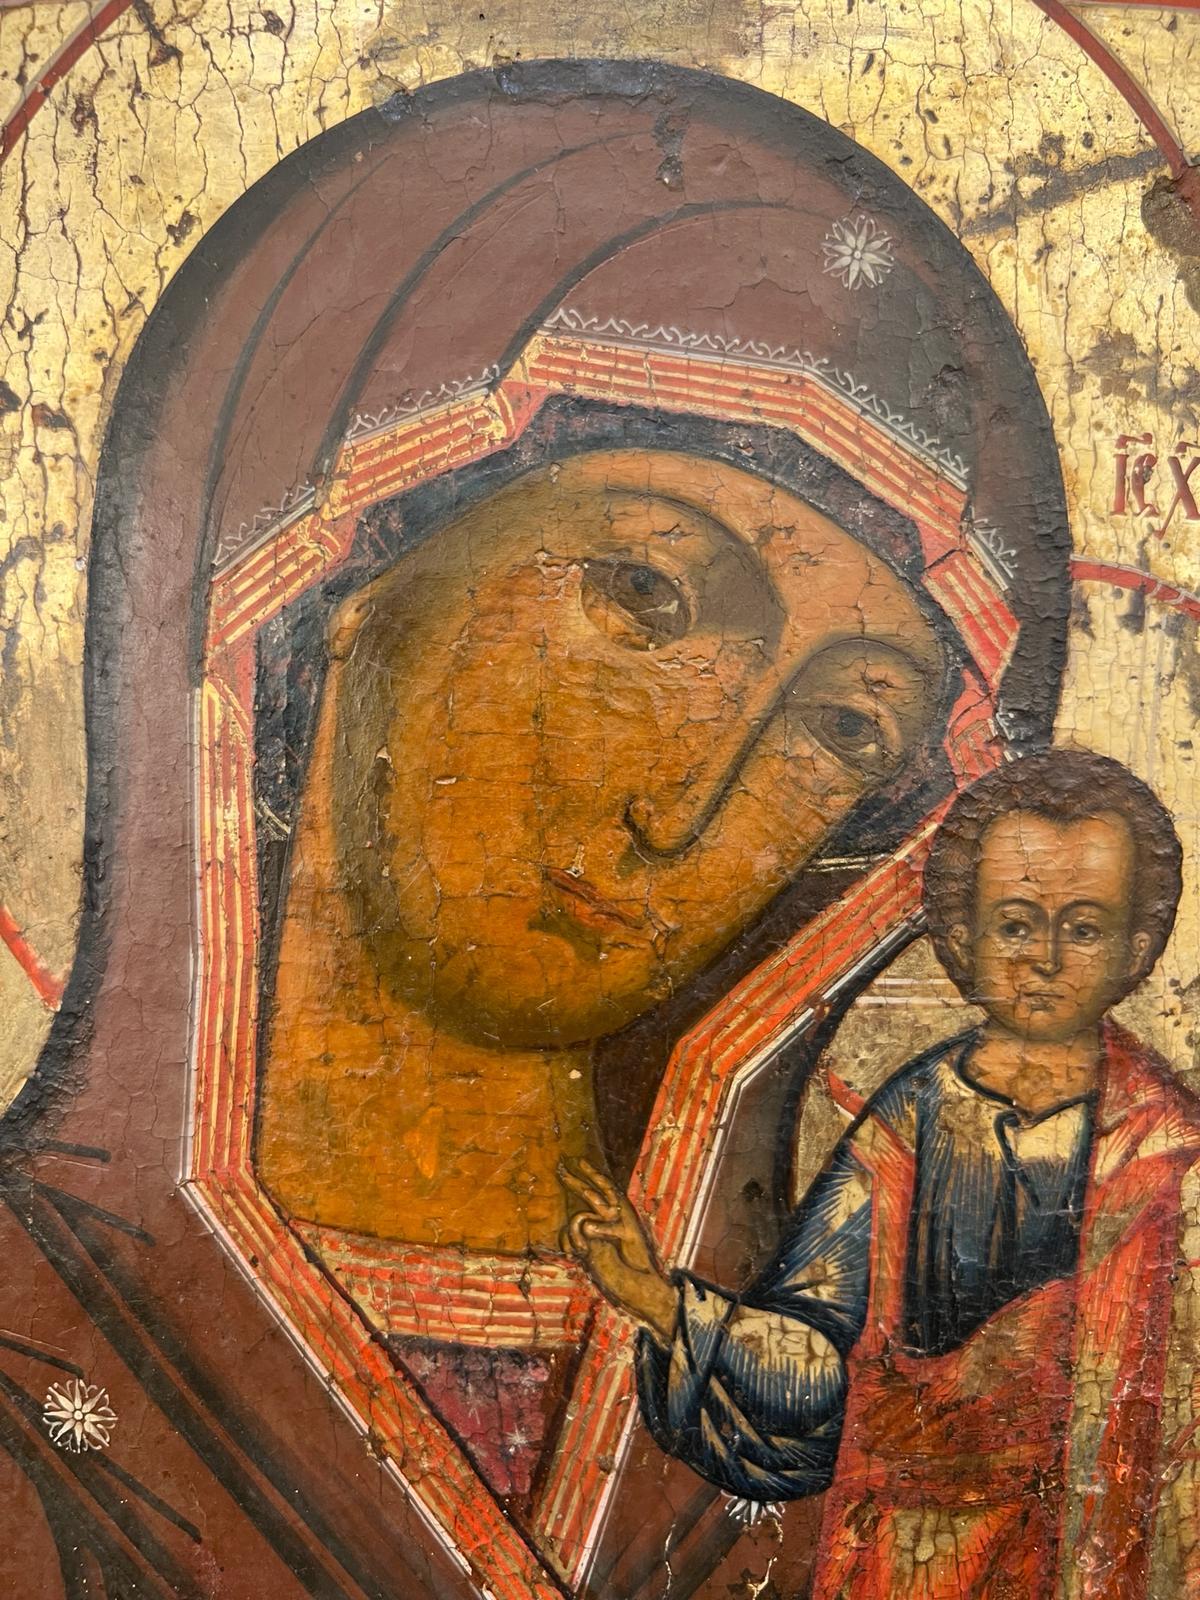 We present you with a beautiful orthodox icon from the mid-19th century in Russia. Our Lady of Kazan, also known as the Mother of God of Kazan, known as the Holy Protector of Russia, is a sacred icon of the highest stature within the Russian